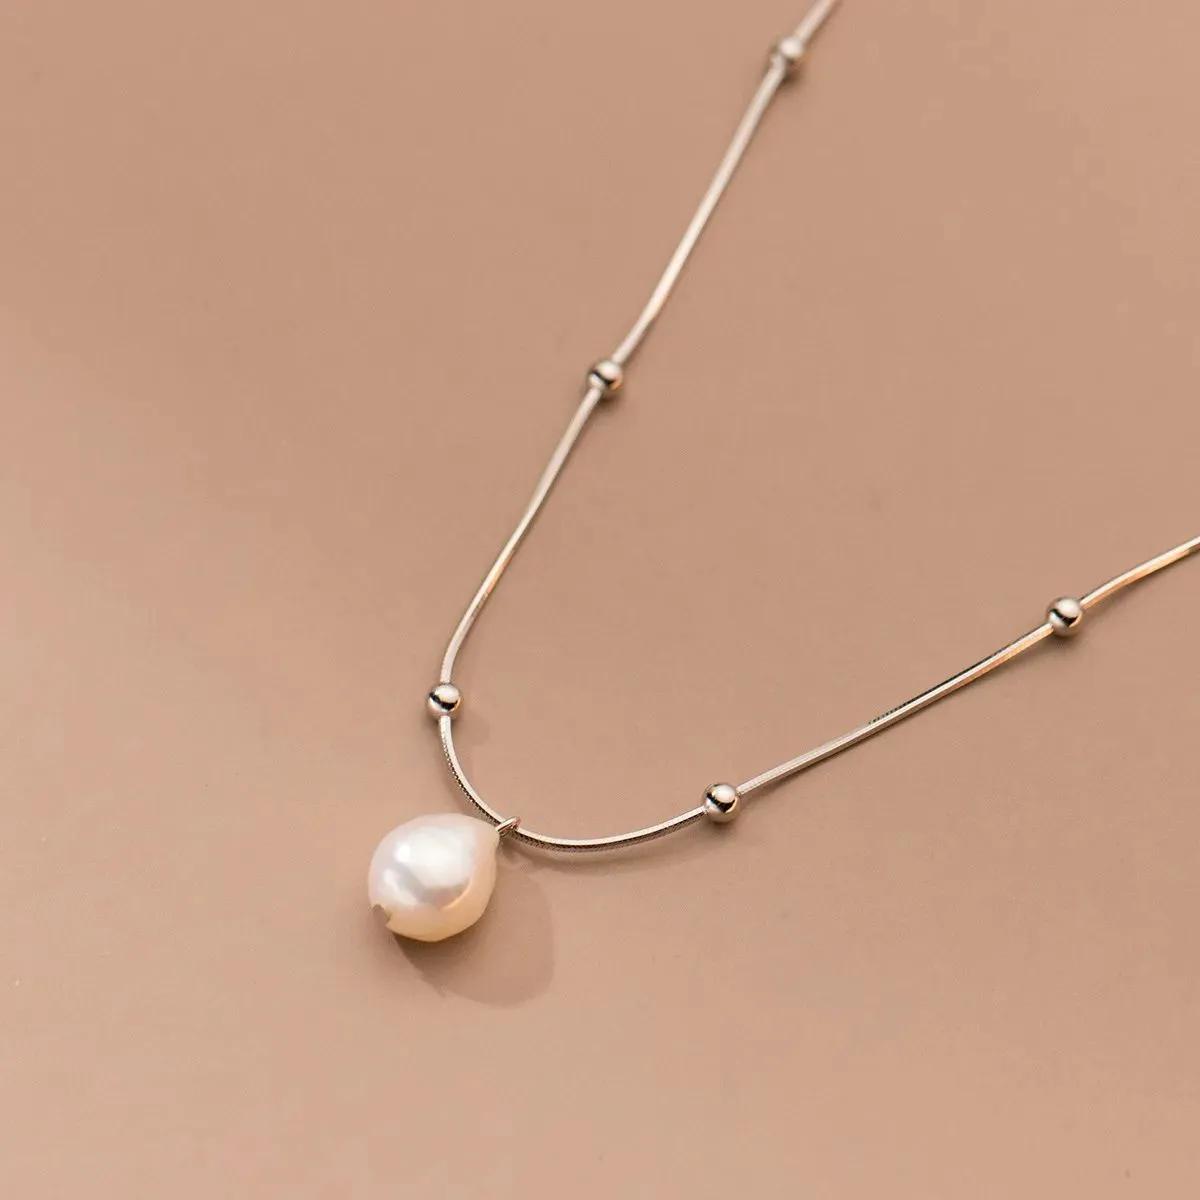 S925 Sterling Silver Fashion Simple Snake Bone Chain Natural Baroque Pearl Necklace for Women Elegant Clavicle Jewelry